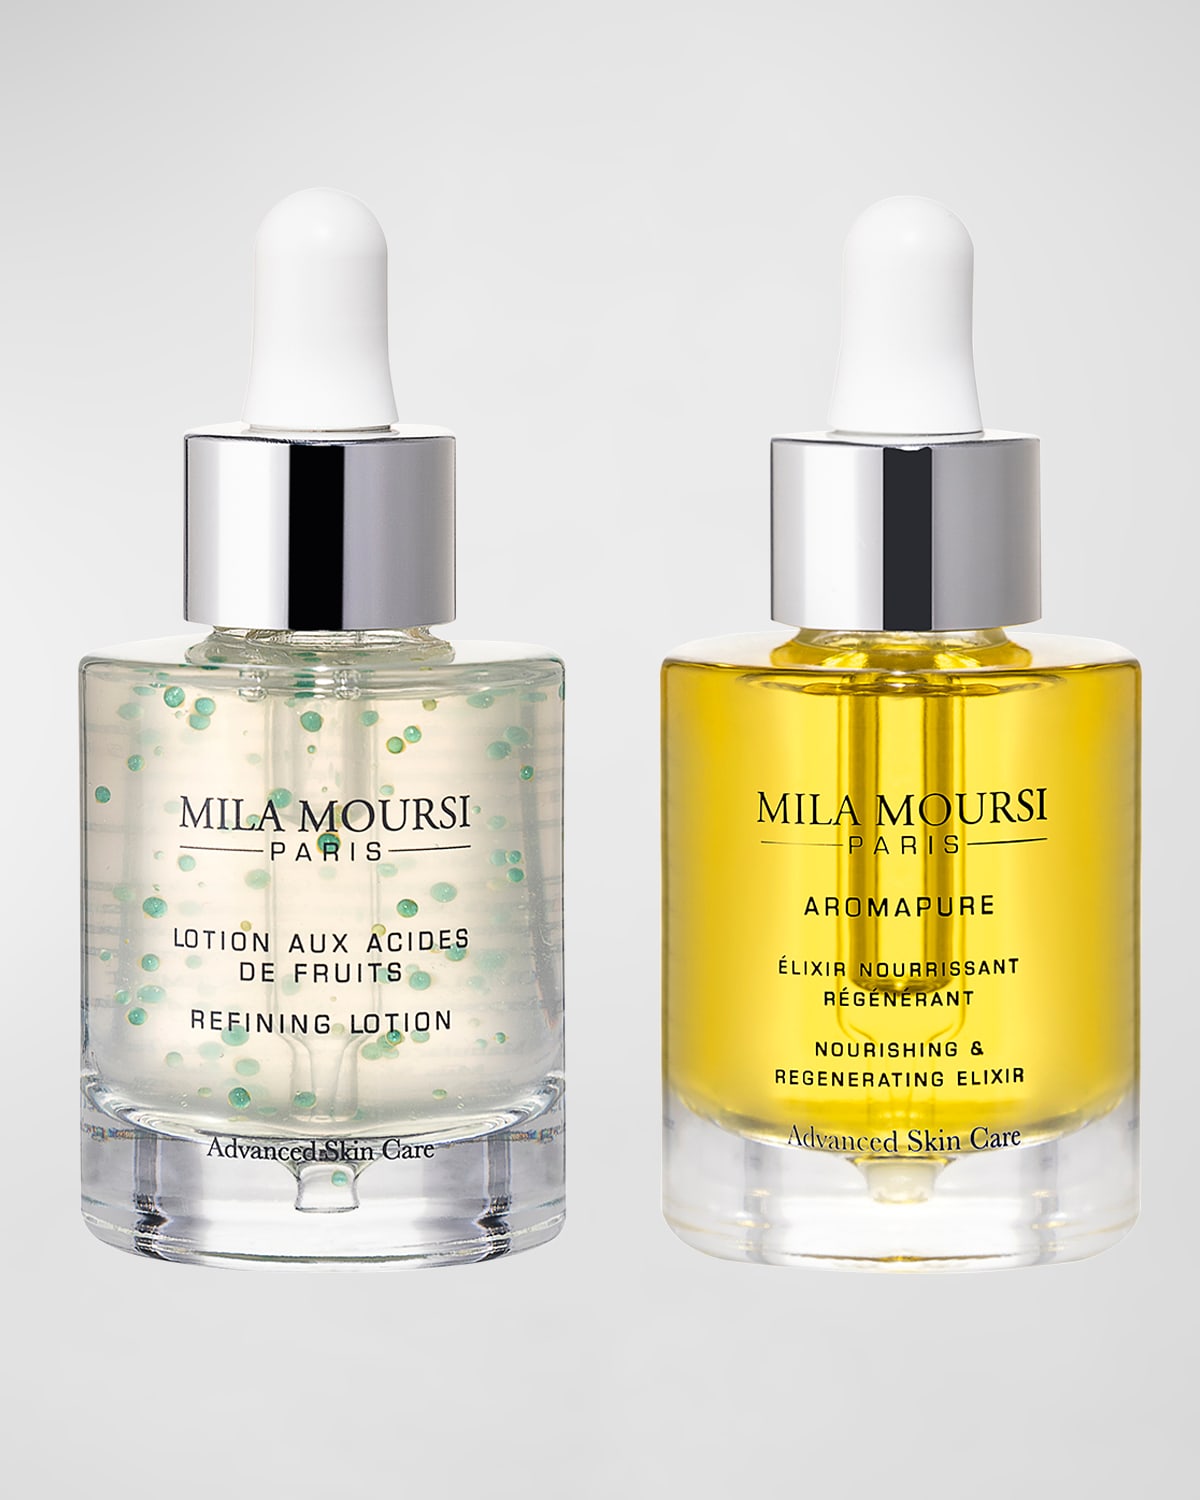 Mila Moursi Limited Edition Glow Pack Duo ($320 Value)